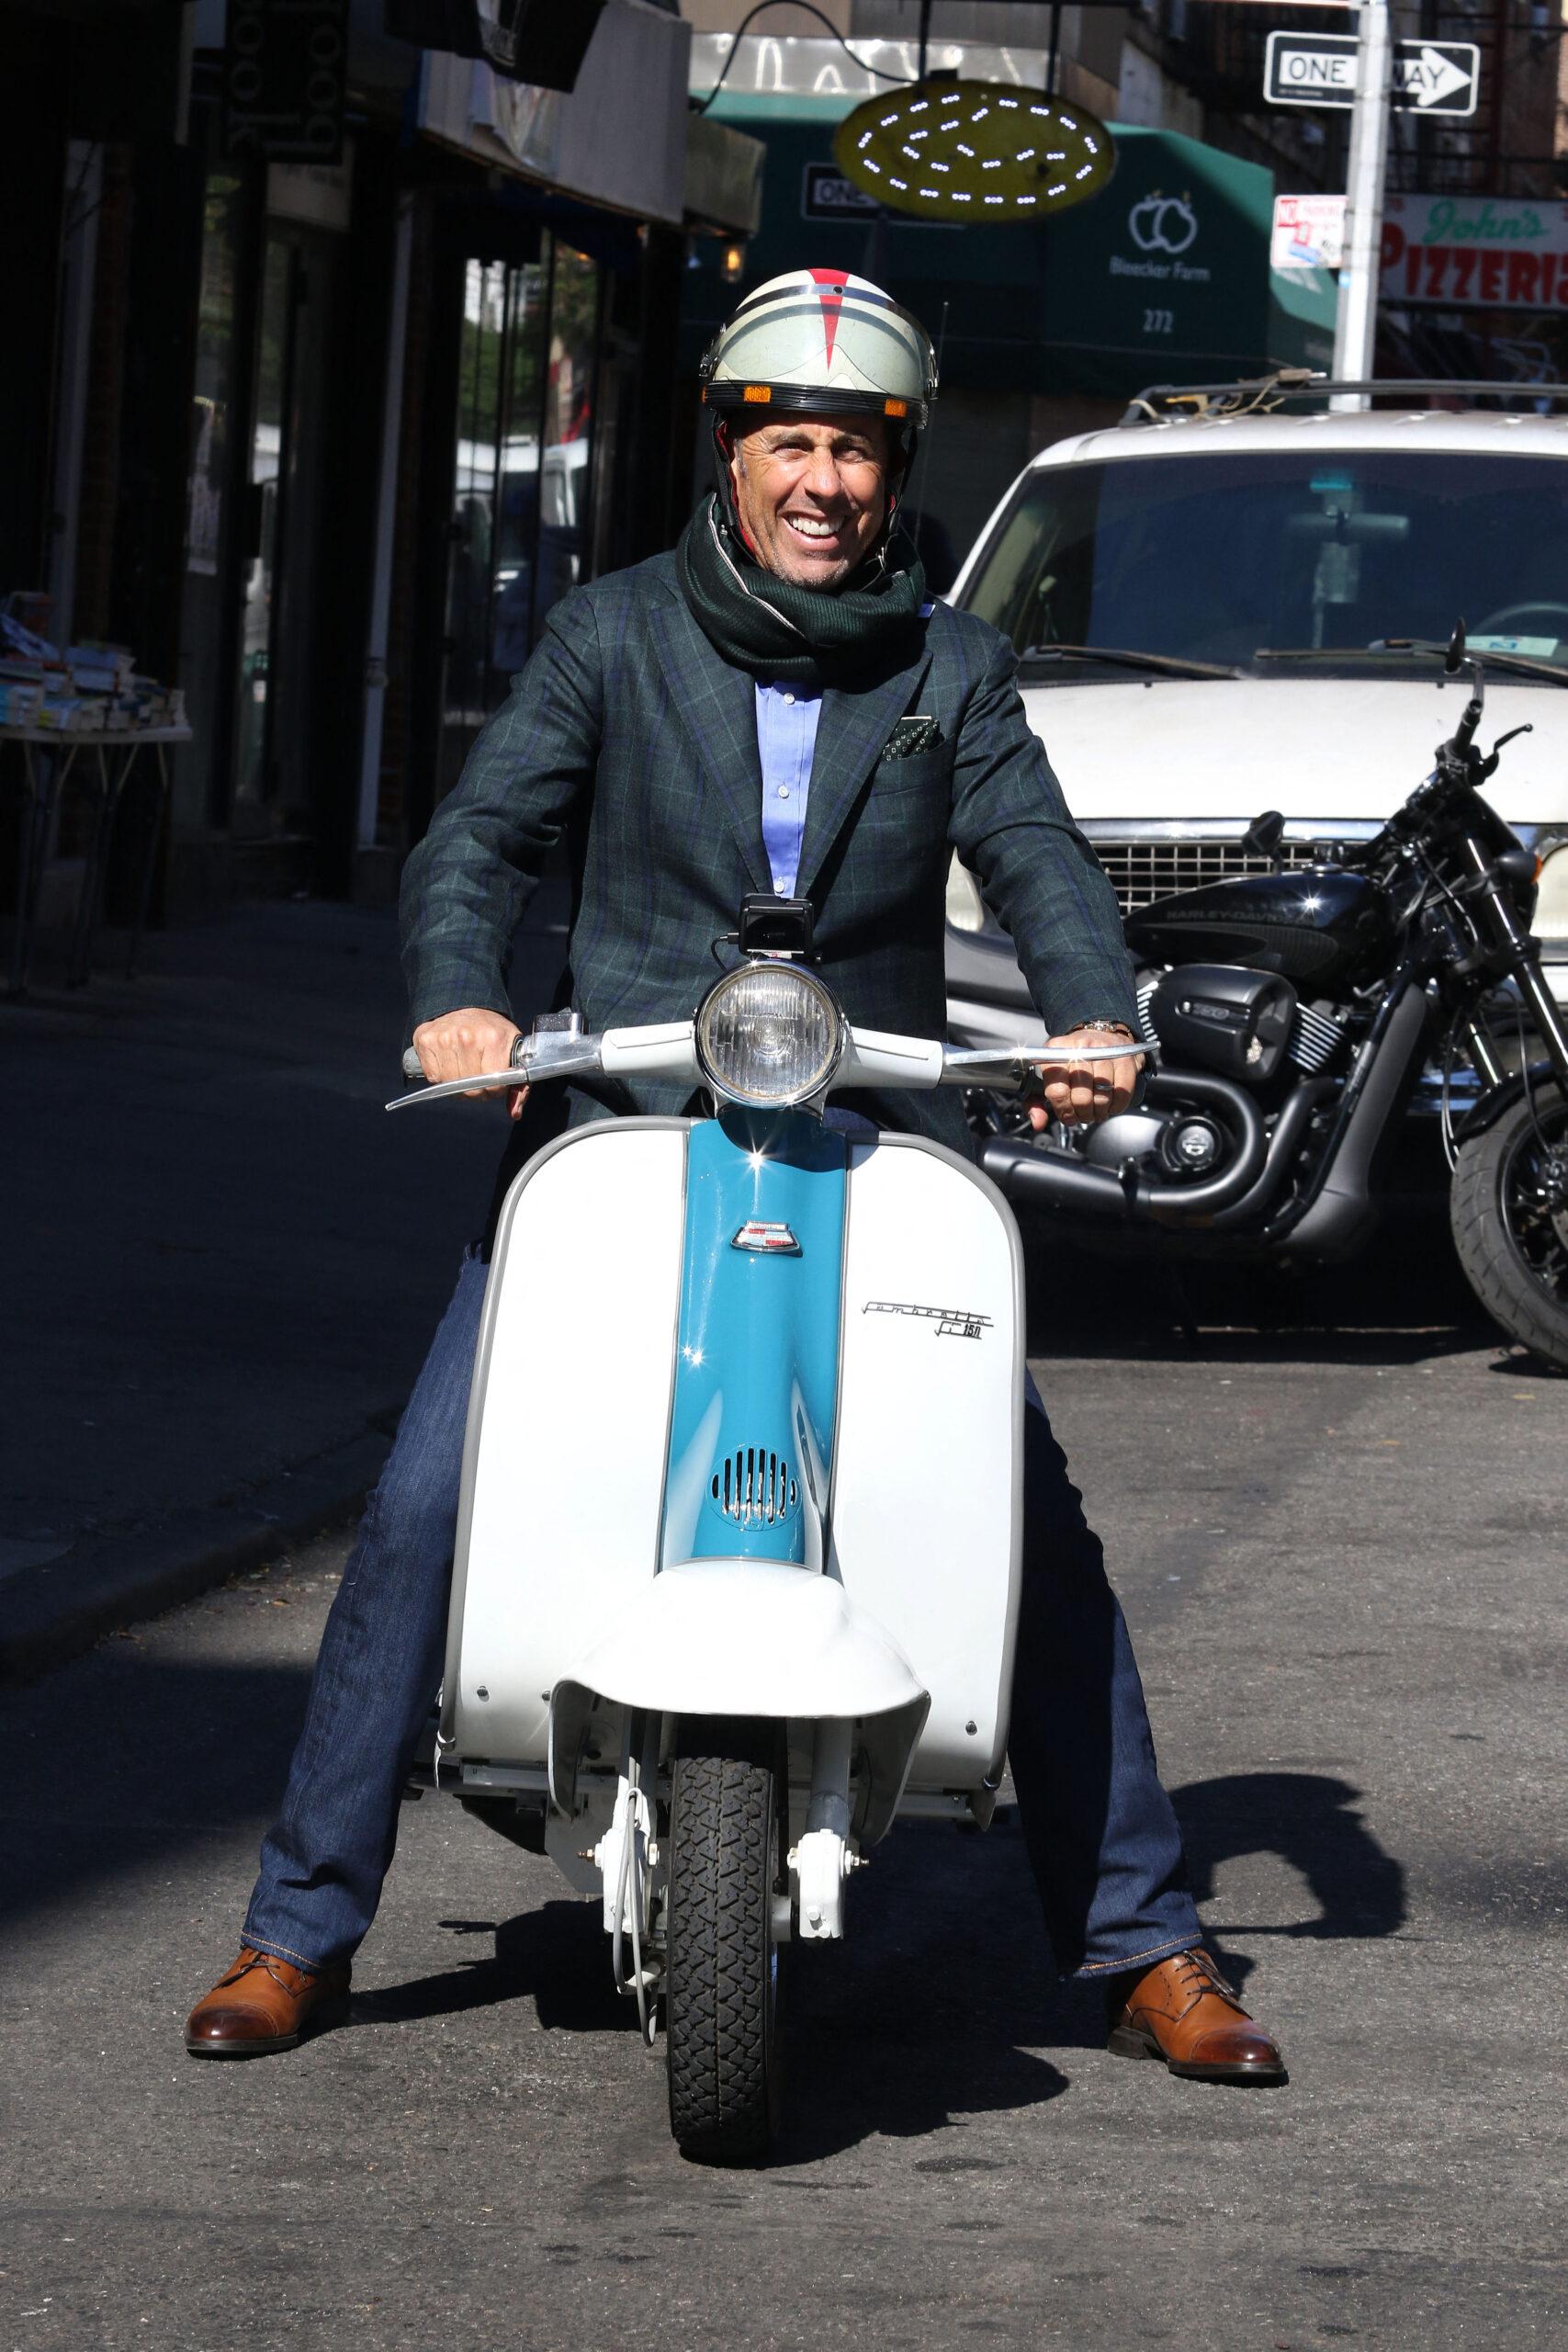 Jerry Seinfeld rides Vespa scooter while filming "Comedians in Cars Getting Coffee" in New York City